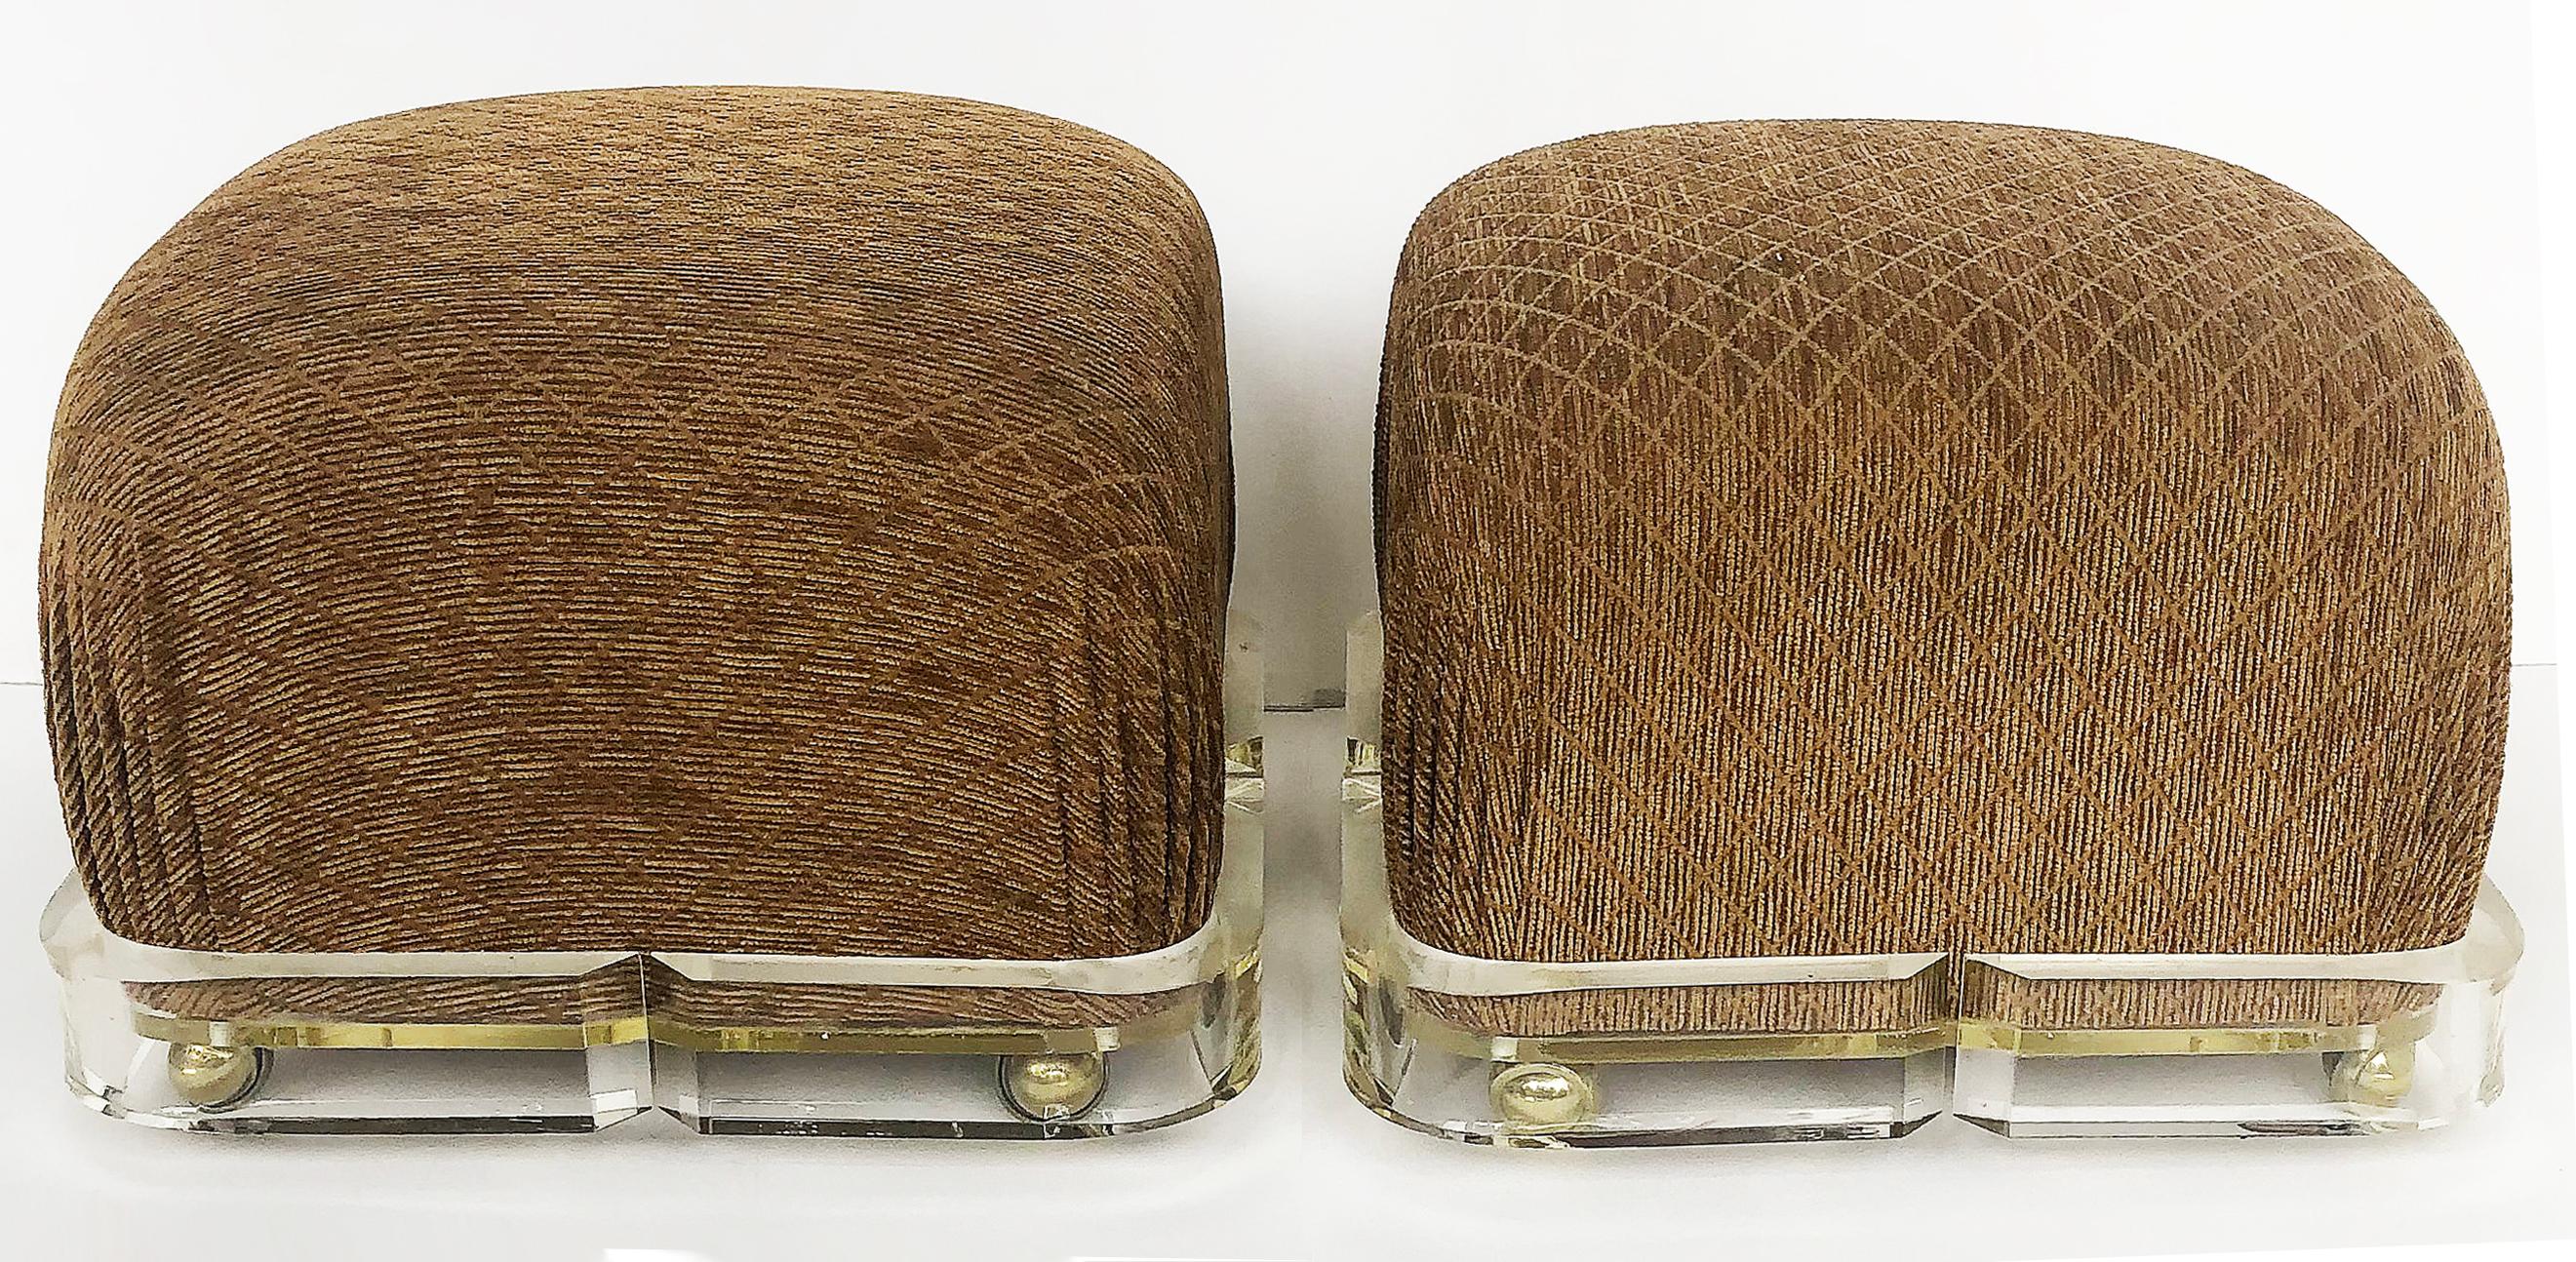 Karl Springer Upholstered Brass/ Lucite ottoman poufs, 1980s on Casters, a pair

Offered for sale is a wonderful pair of Karl Springer rolling poufs. The matching poufs are upholstered in a textured velvet which recesses into the Lucite rolling